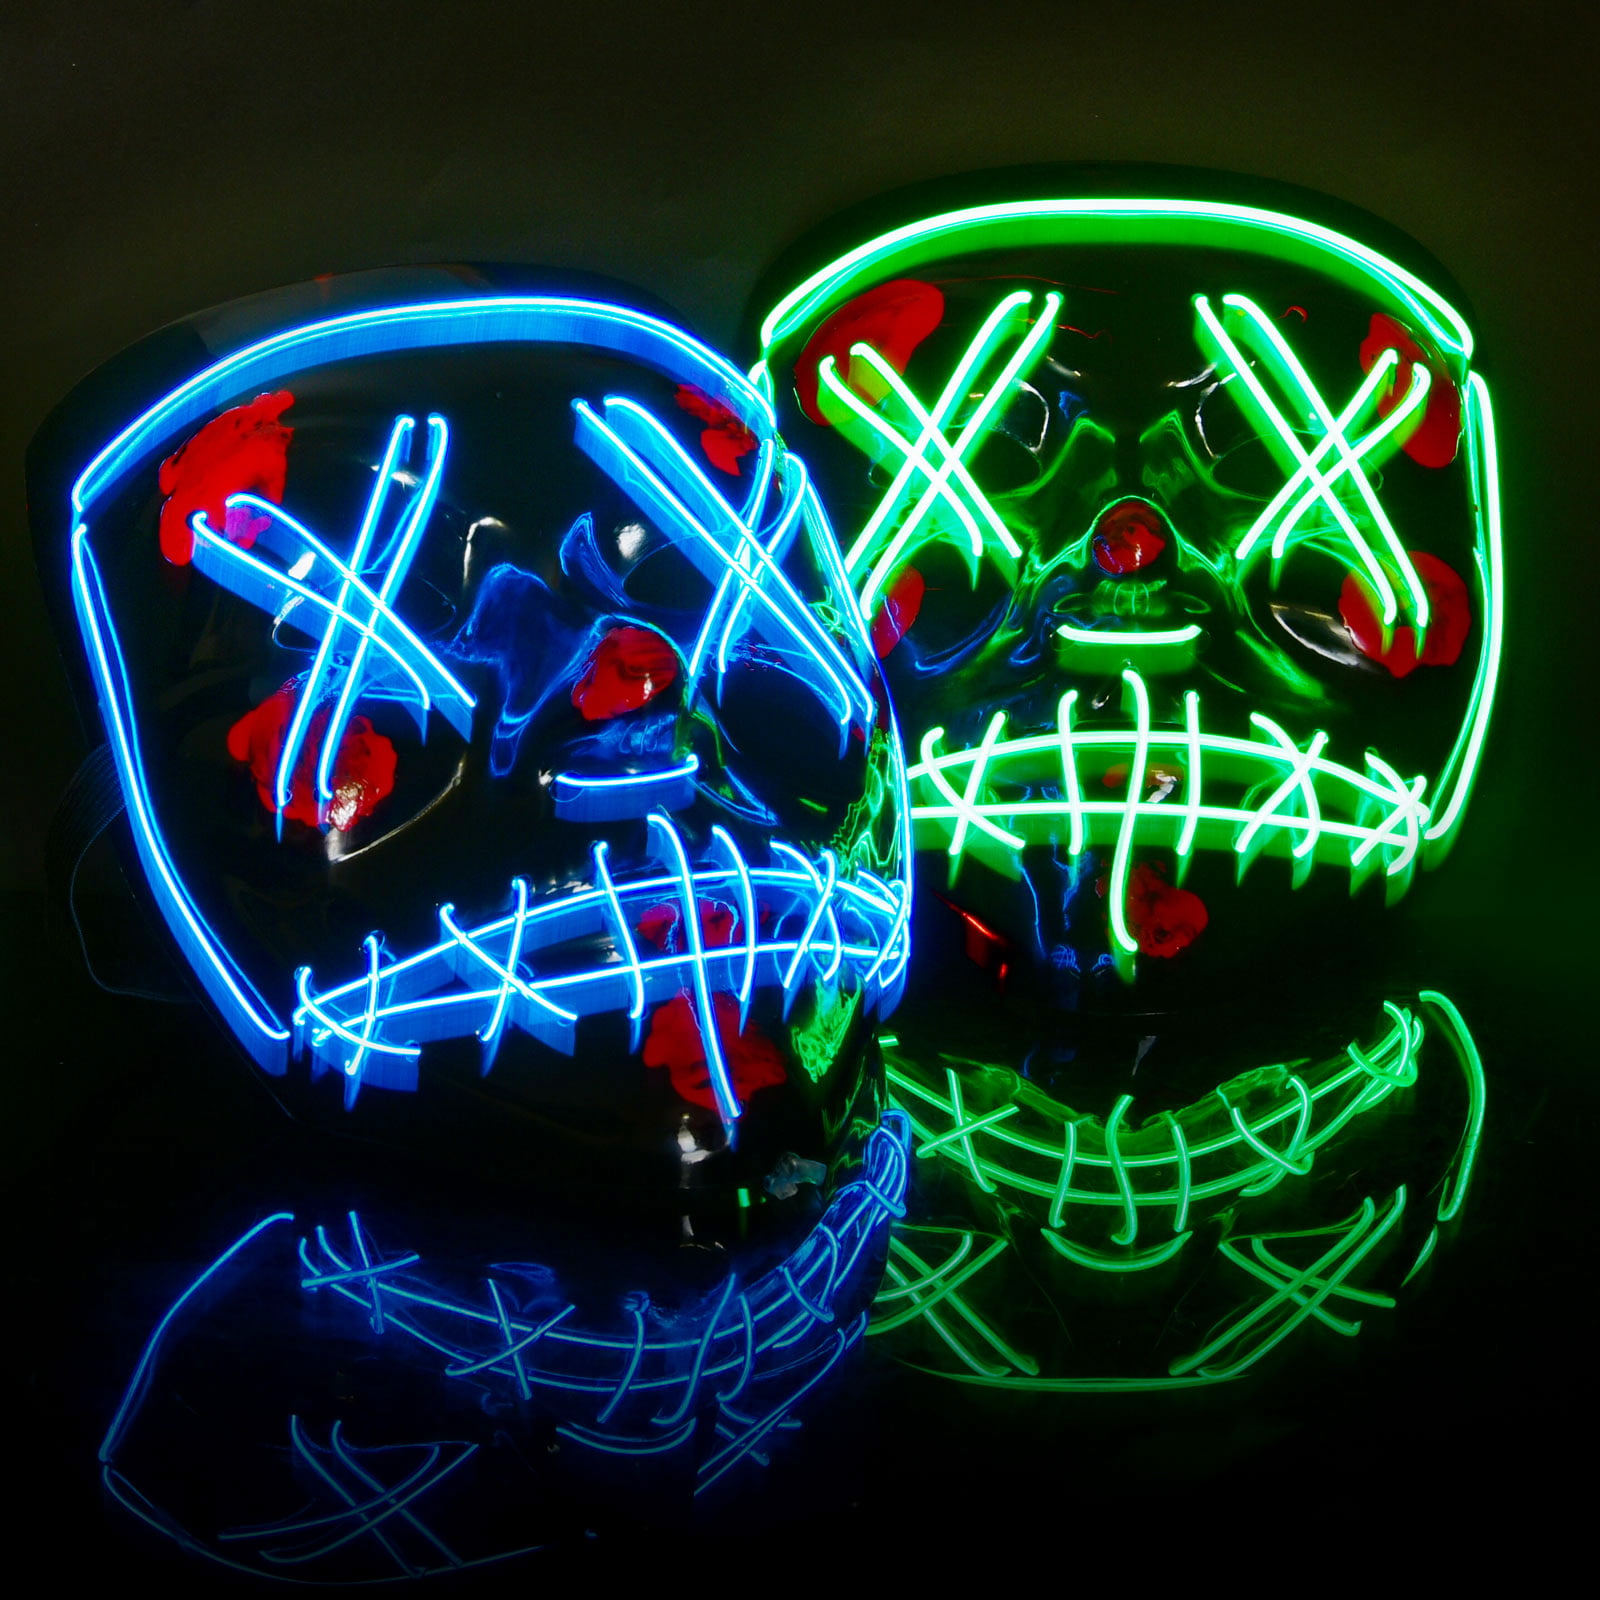 Halloween LED Mask Light Up Scary Mask for Men Women Kids Halloween Festival Cosplay Costume Party Supplies 